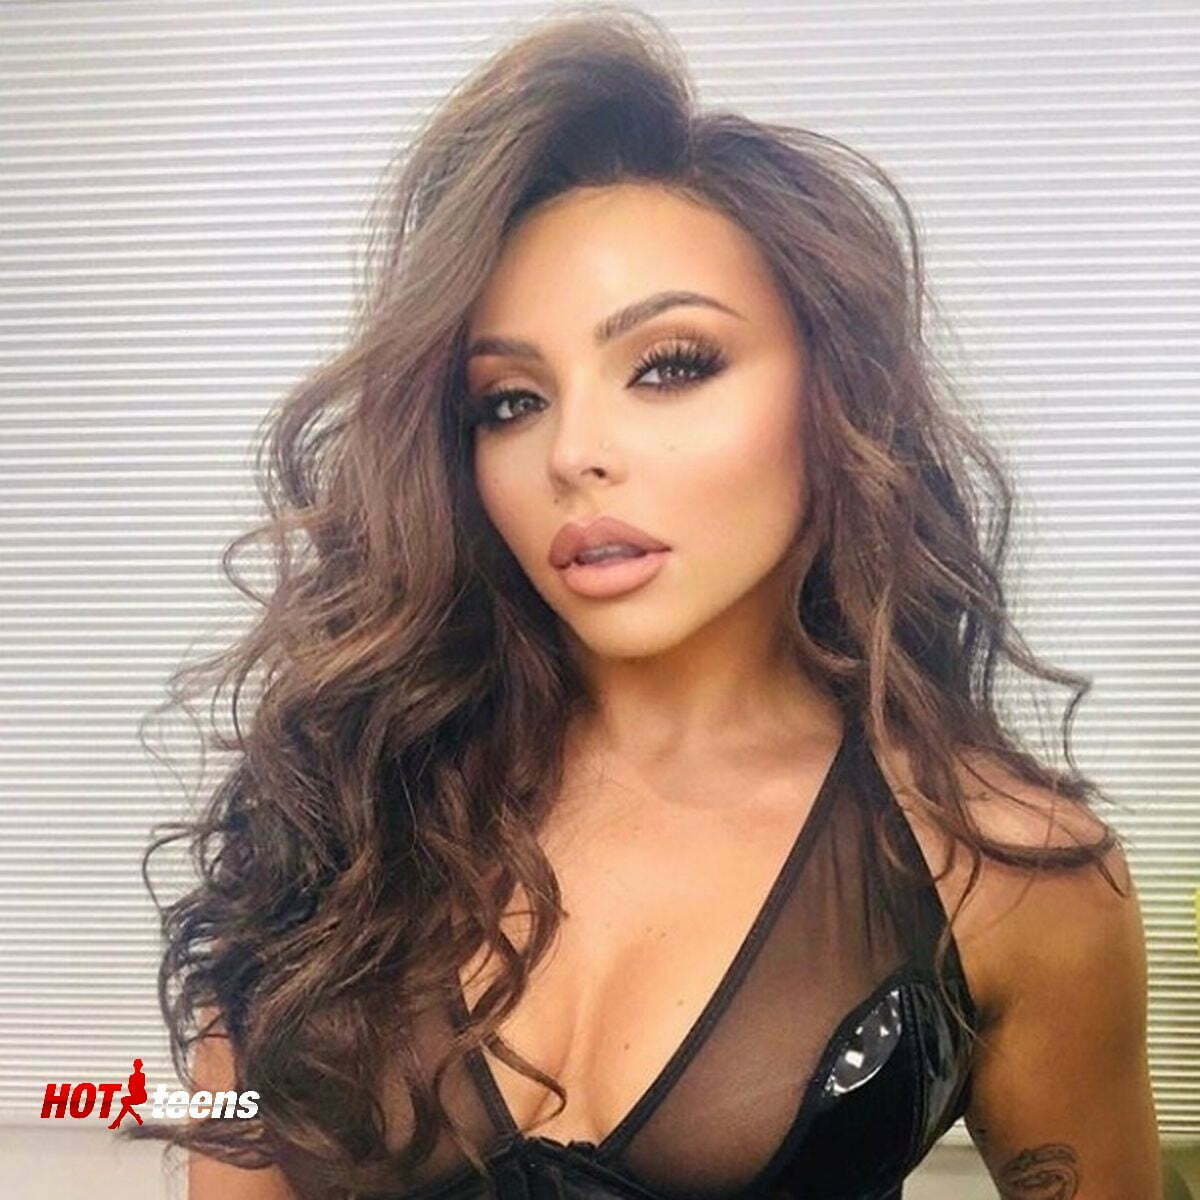 Jesy Nelson Nude Boobs Flashed in Public.